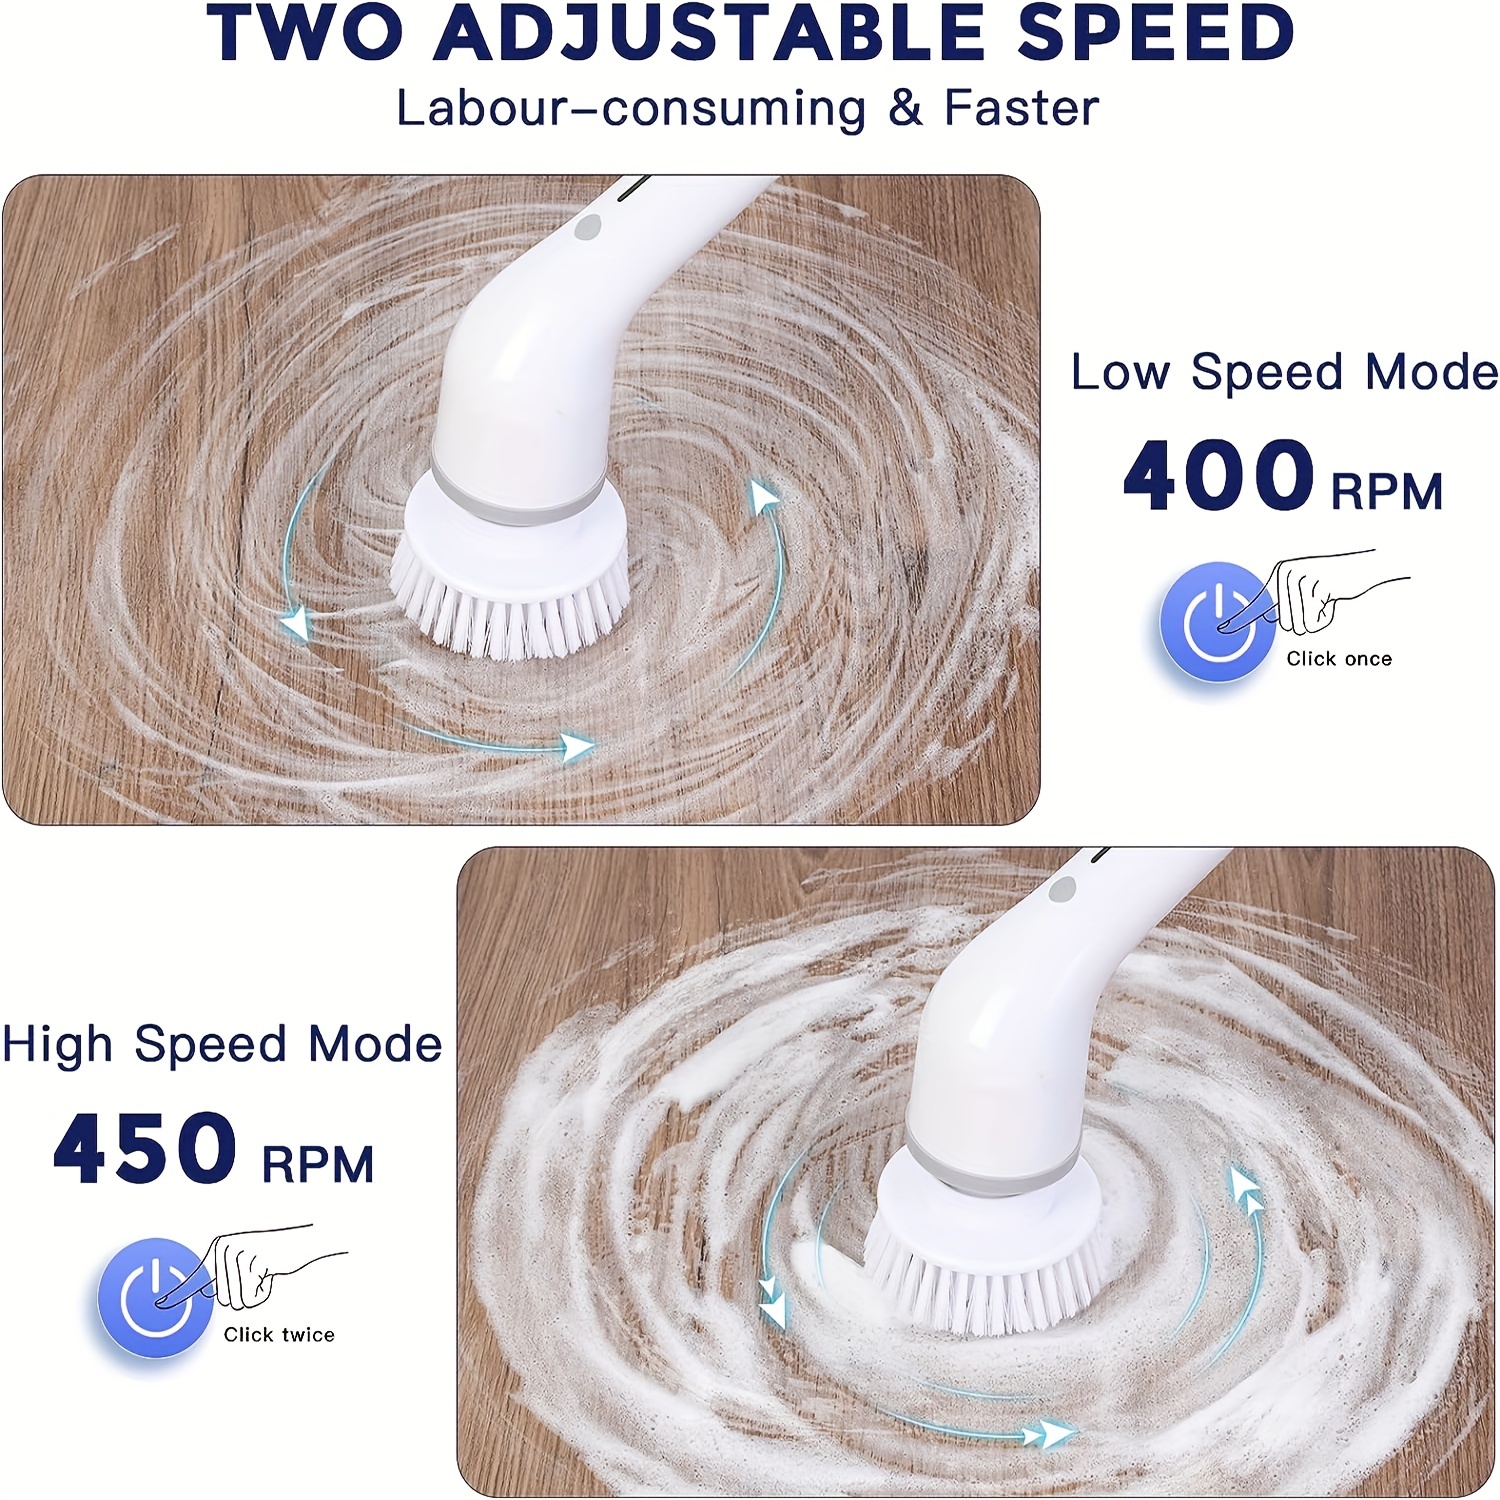 Electric Spin Scrubber, FARI Shower Cleaning Brush with 8